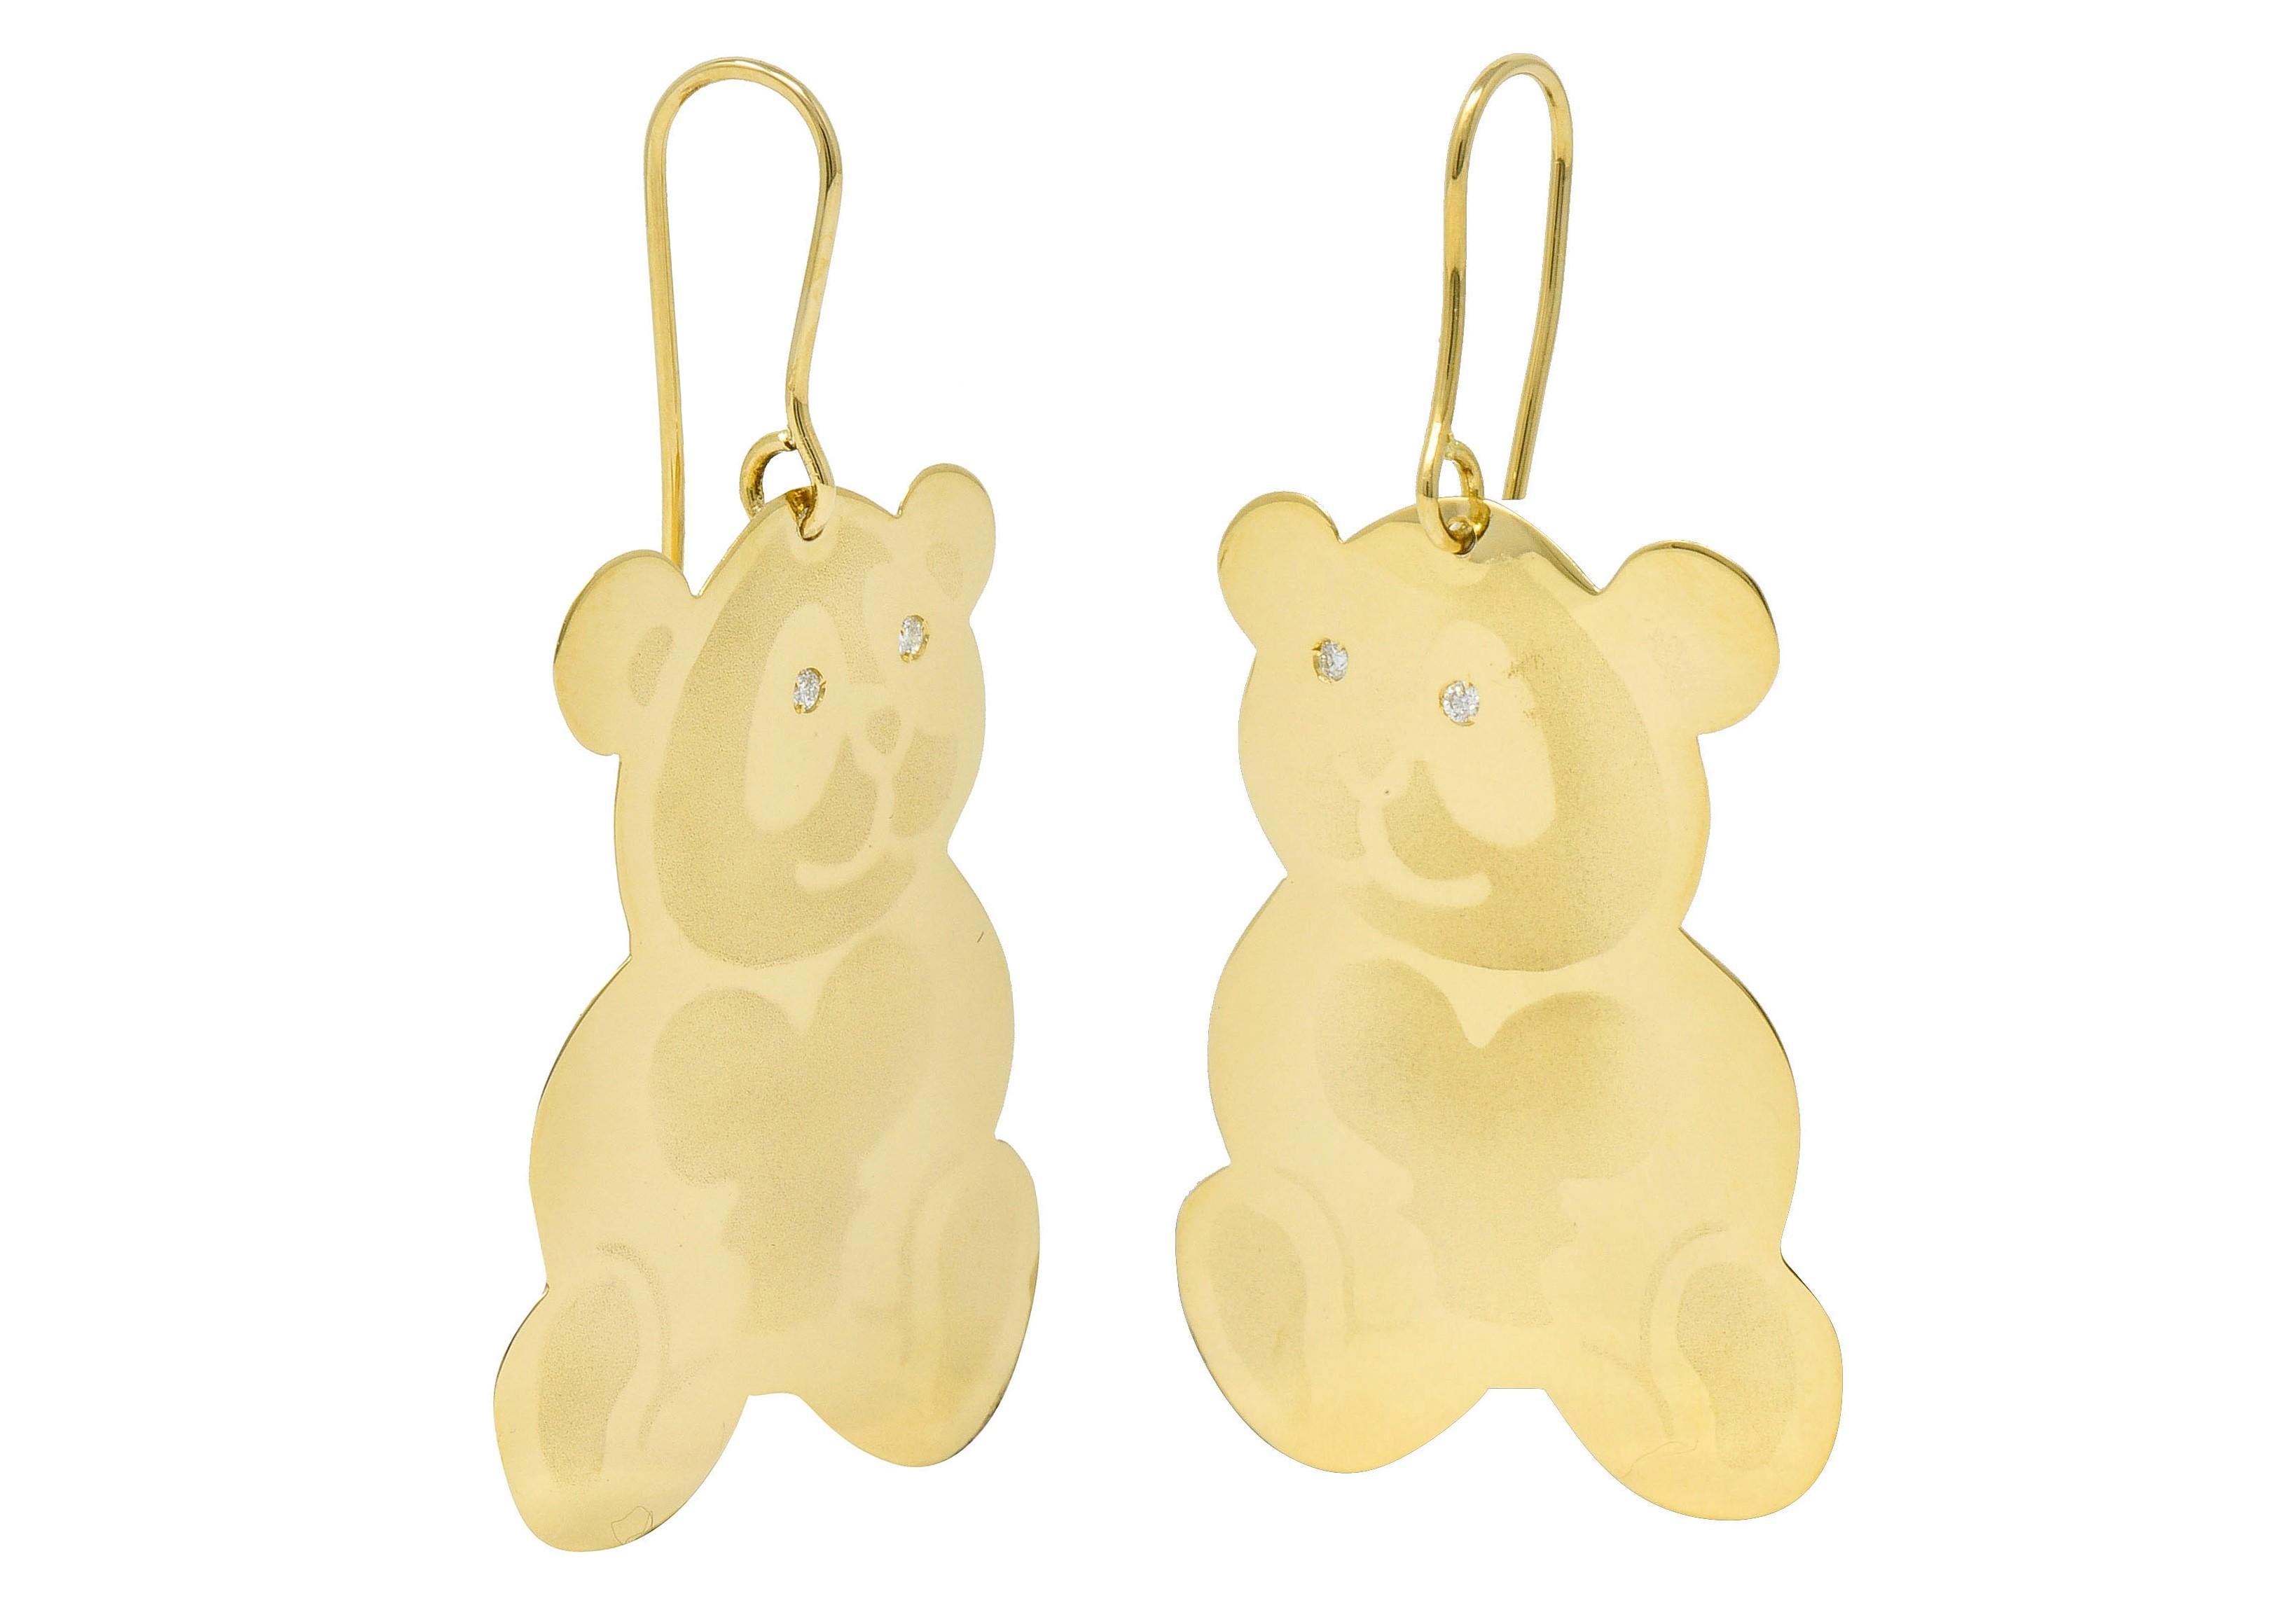 French hook earrings suspend large bear shaped drops

Lightly etched to depict a seated panda with a heart shaped stomach pattern

With flush set round brilliant cut diamond eyes

Eye-clean and white while weighing in total approximately 0.04